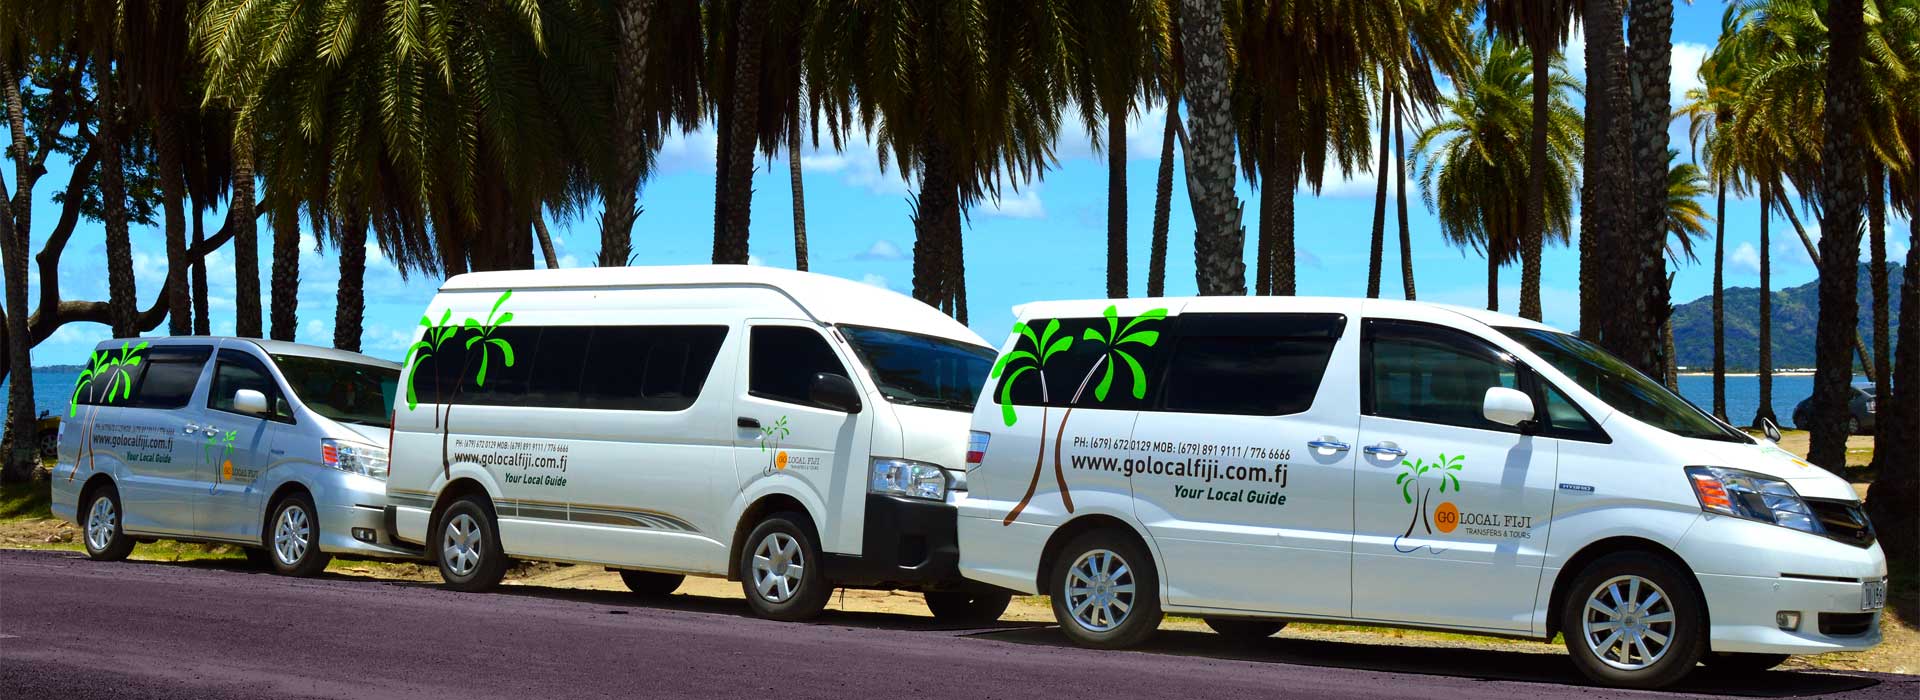 Our Fleet Go local Tours and Transfers